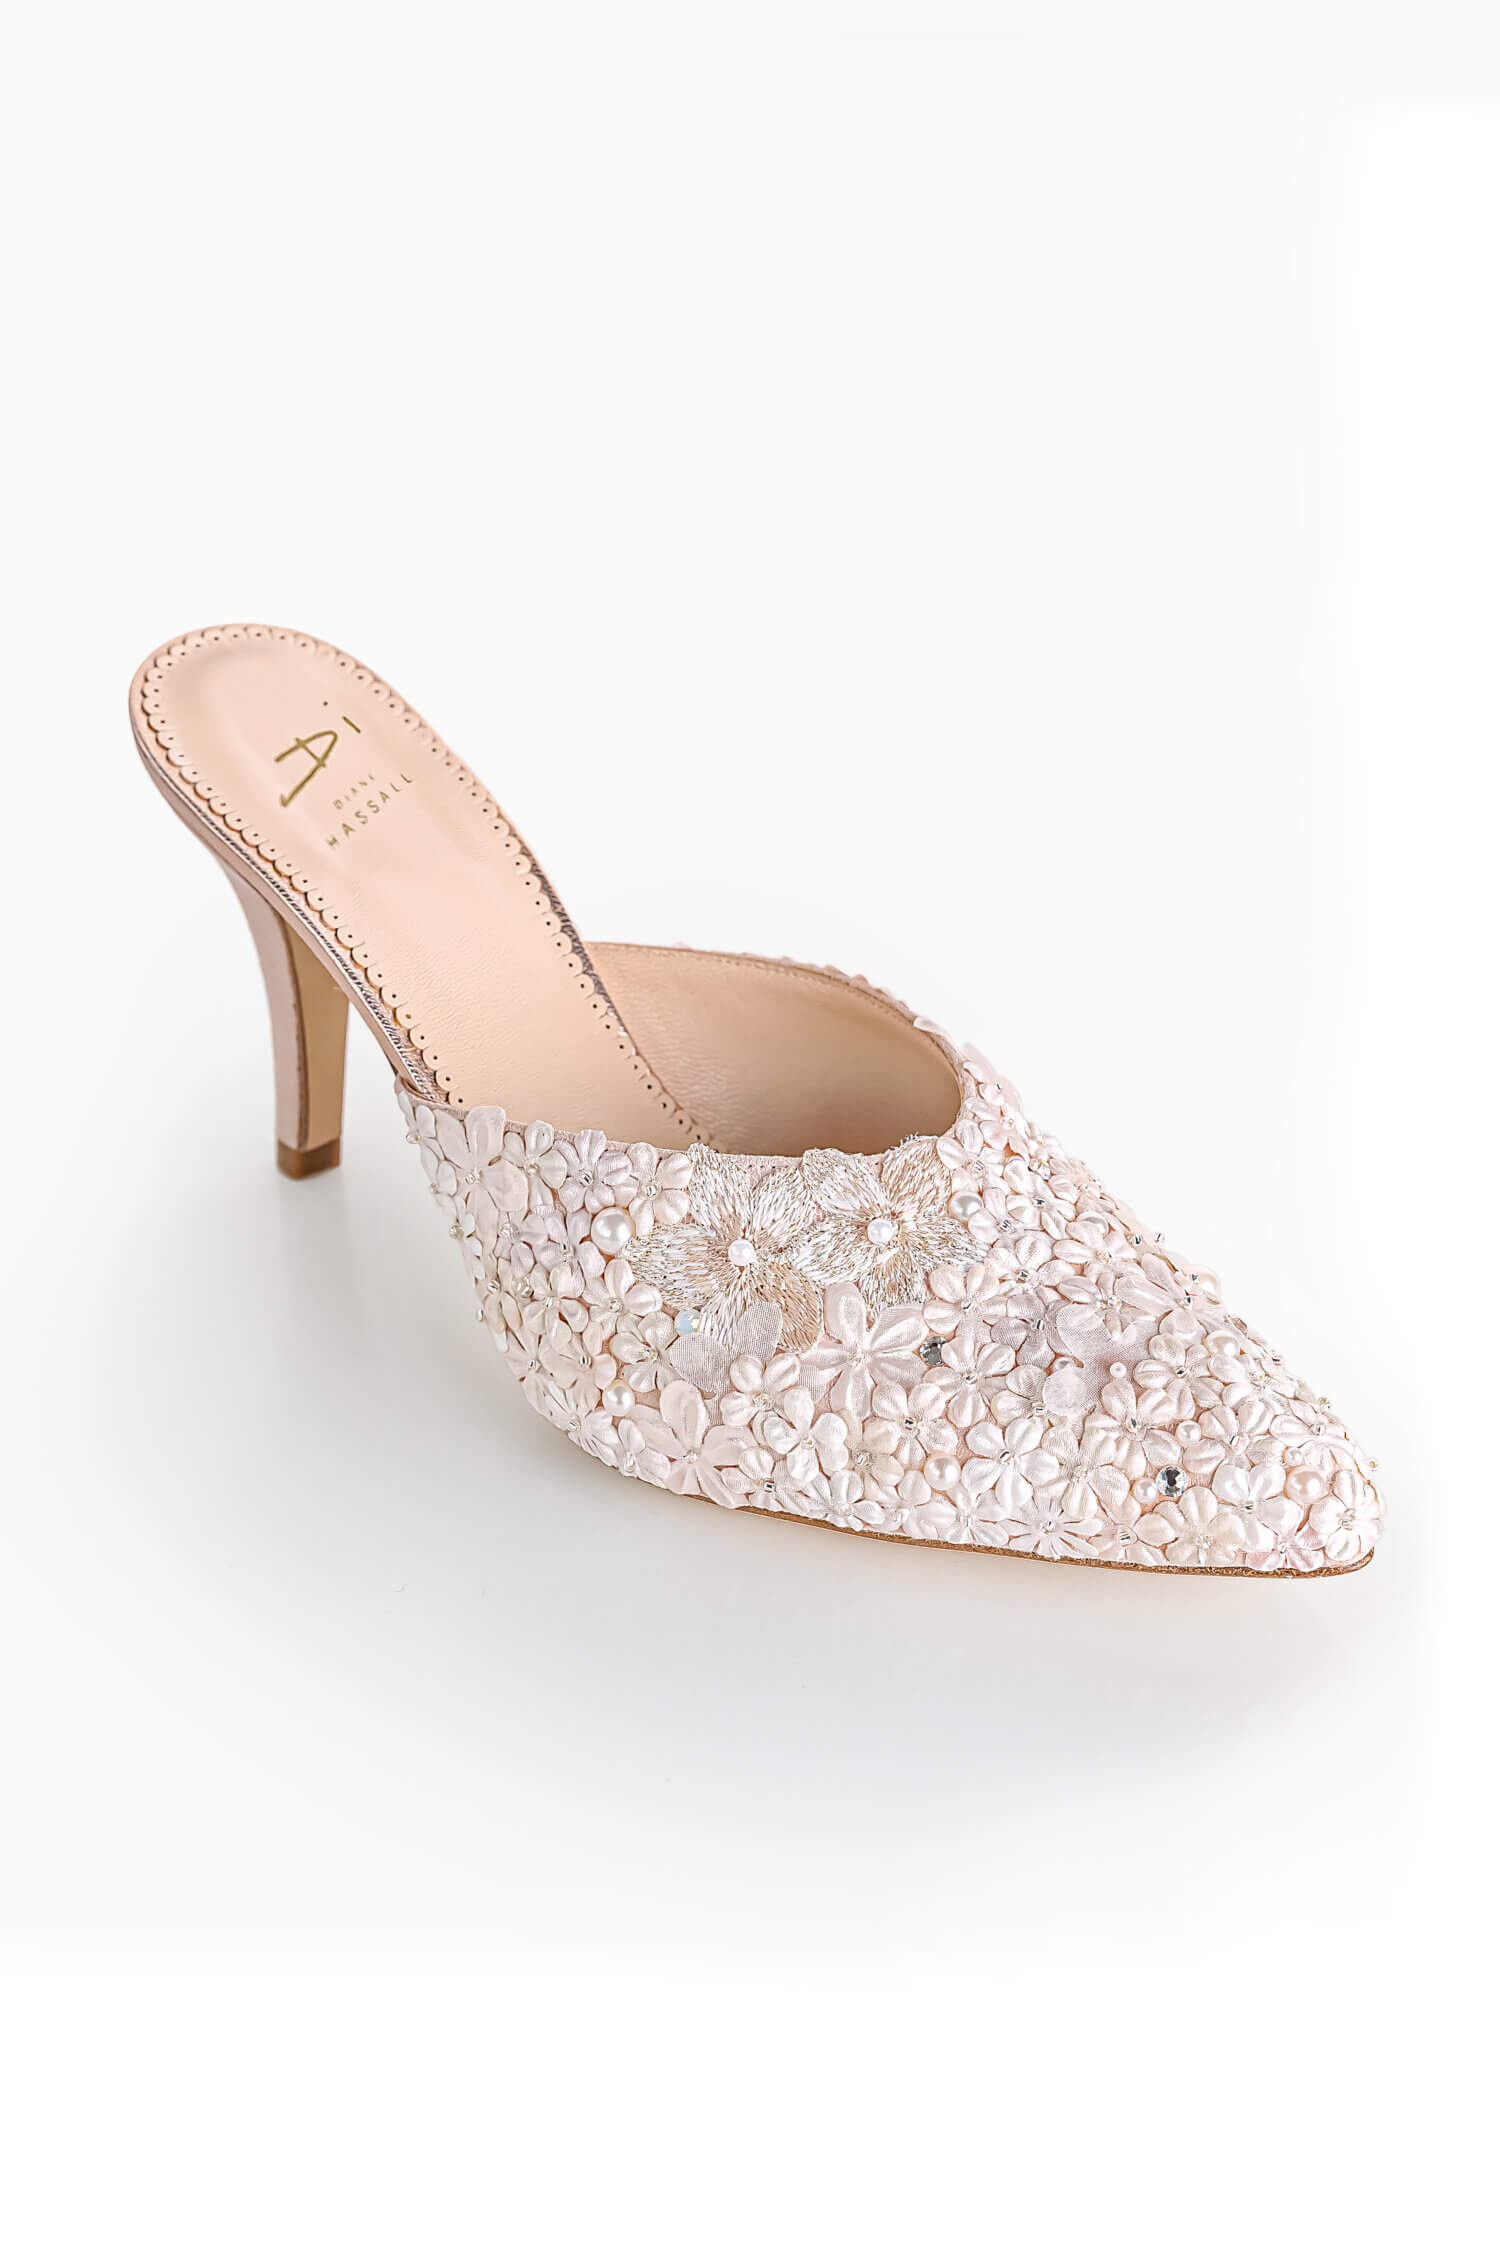 Strawberry Ice embellished bridal mules. Wedding shoes handmade by Di Hassall.